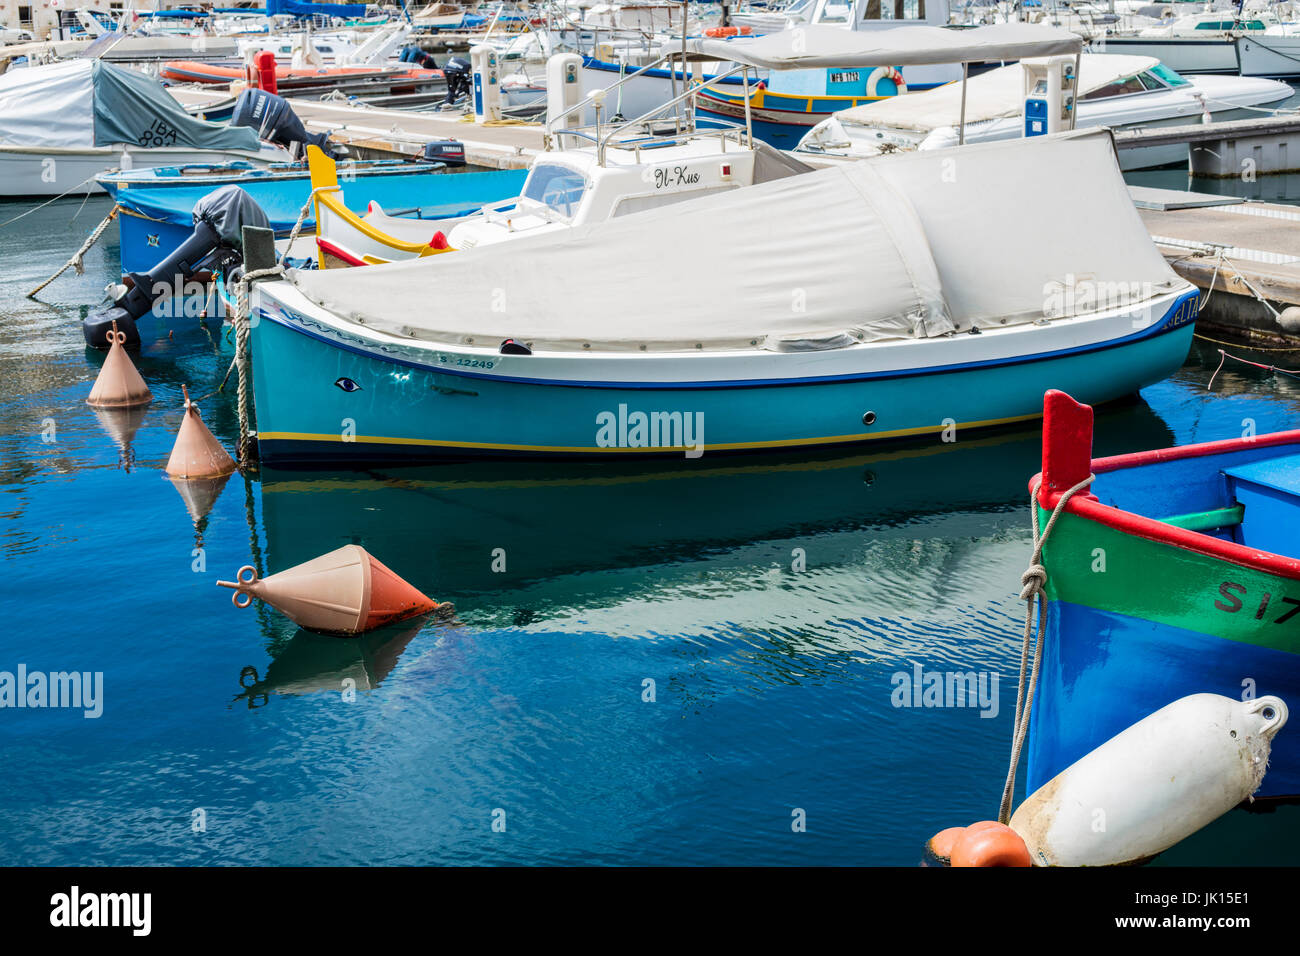 Boats at a port on a sunny day in Malta Stock Photo